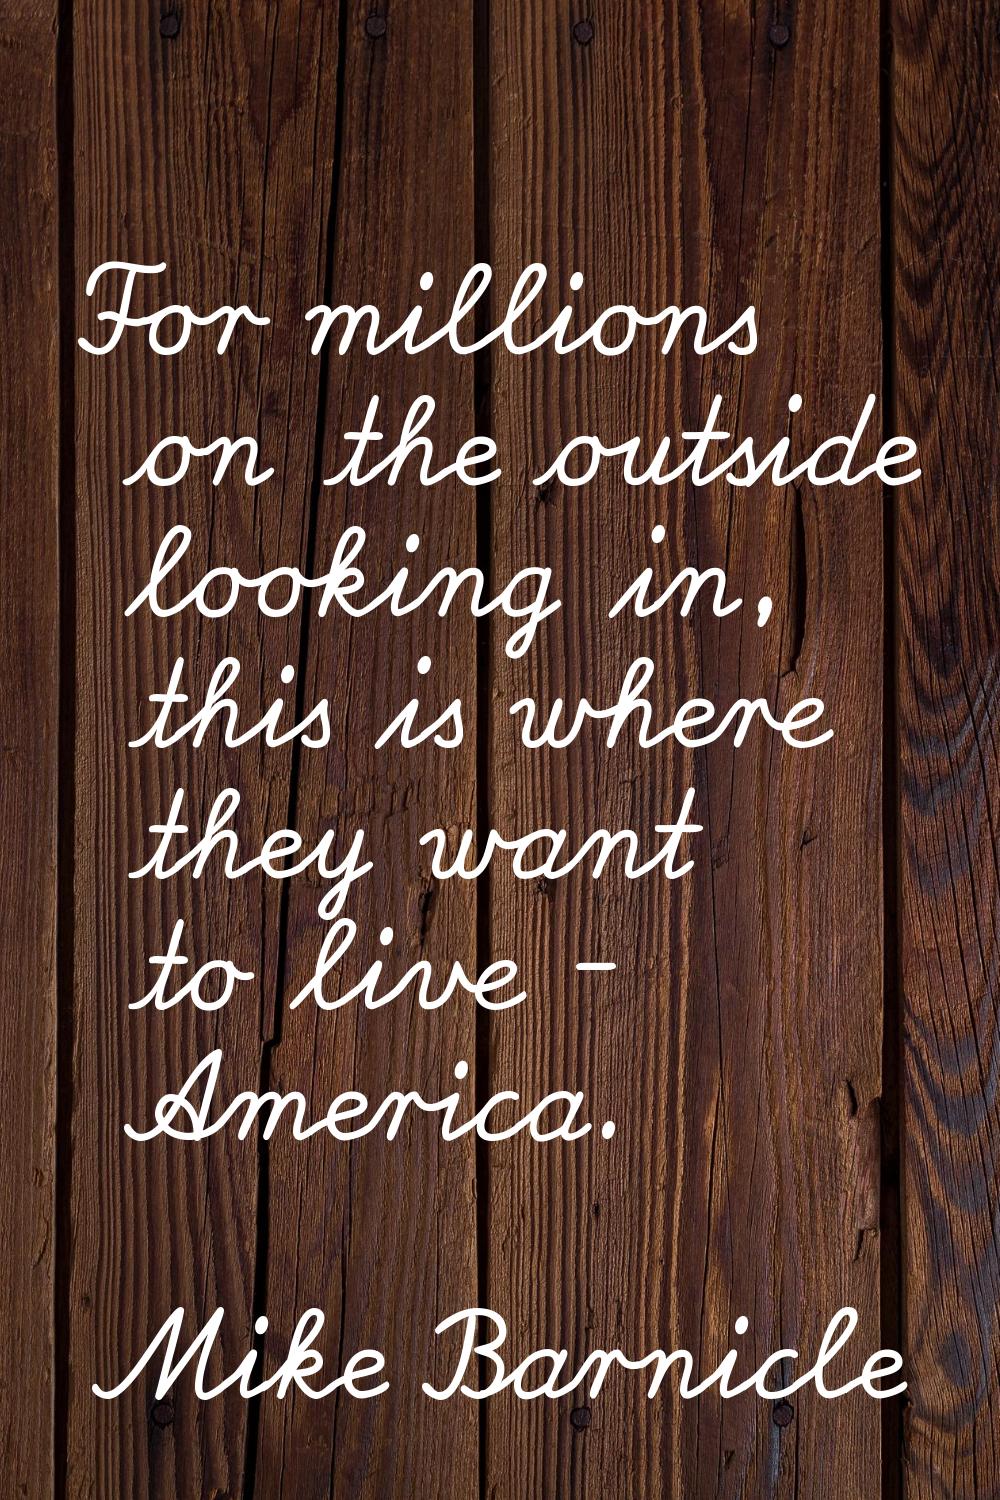 For millions on the outside looking in, this is where they want to live - America.